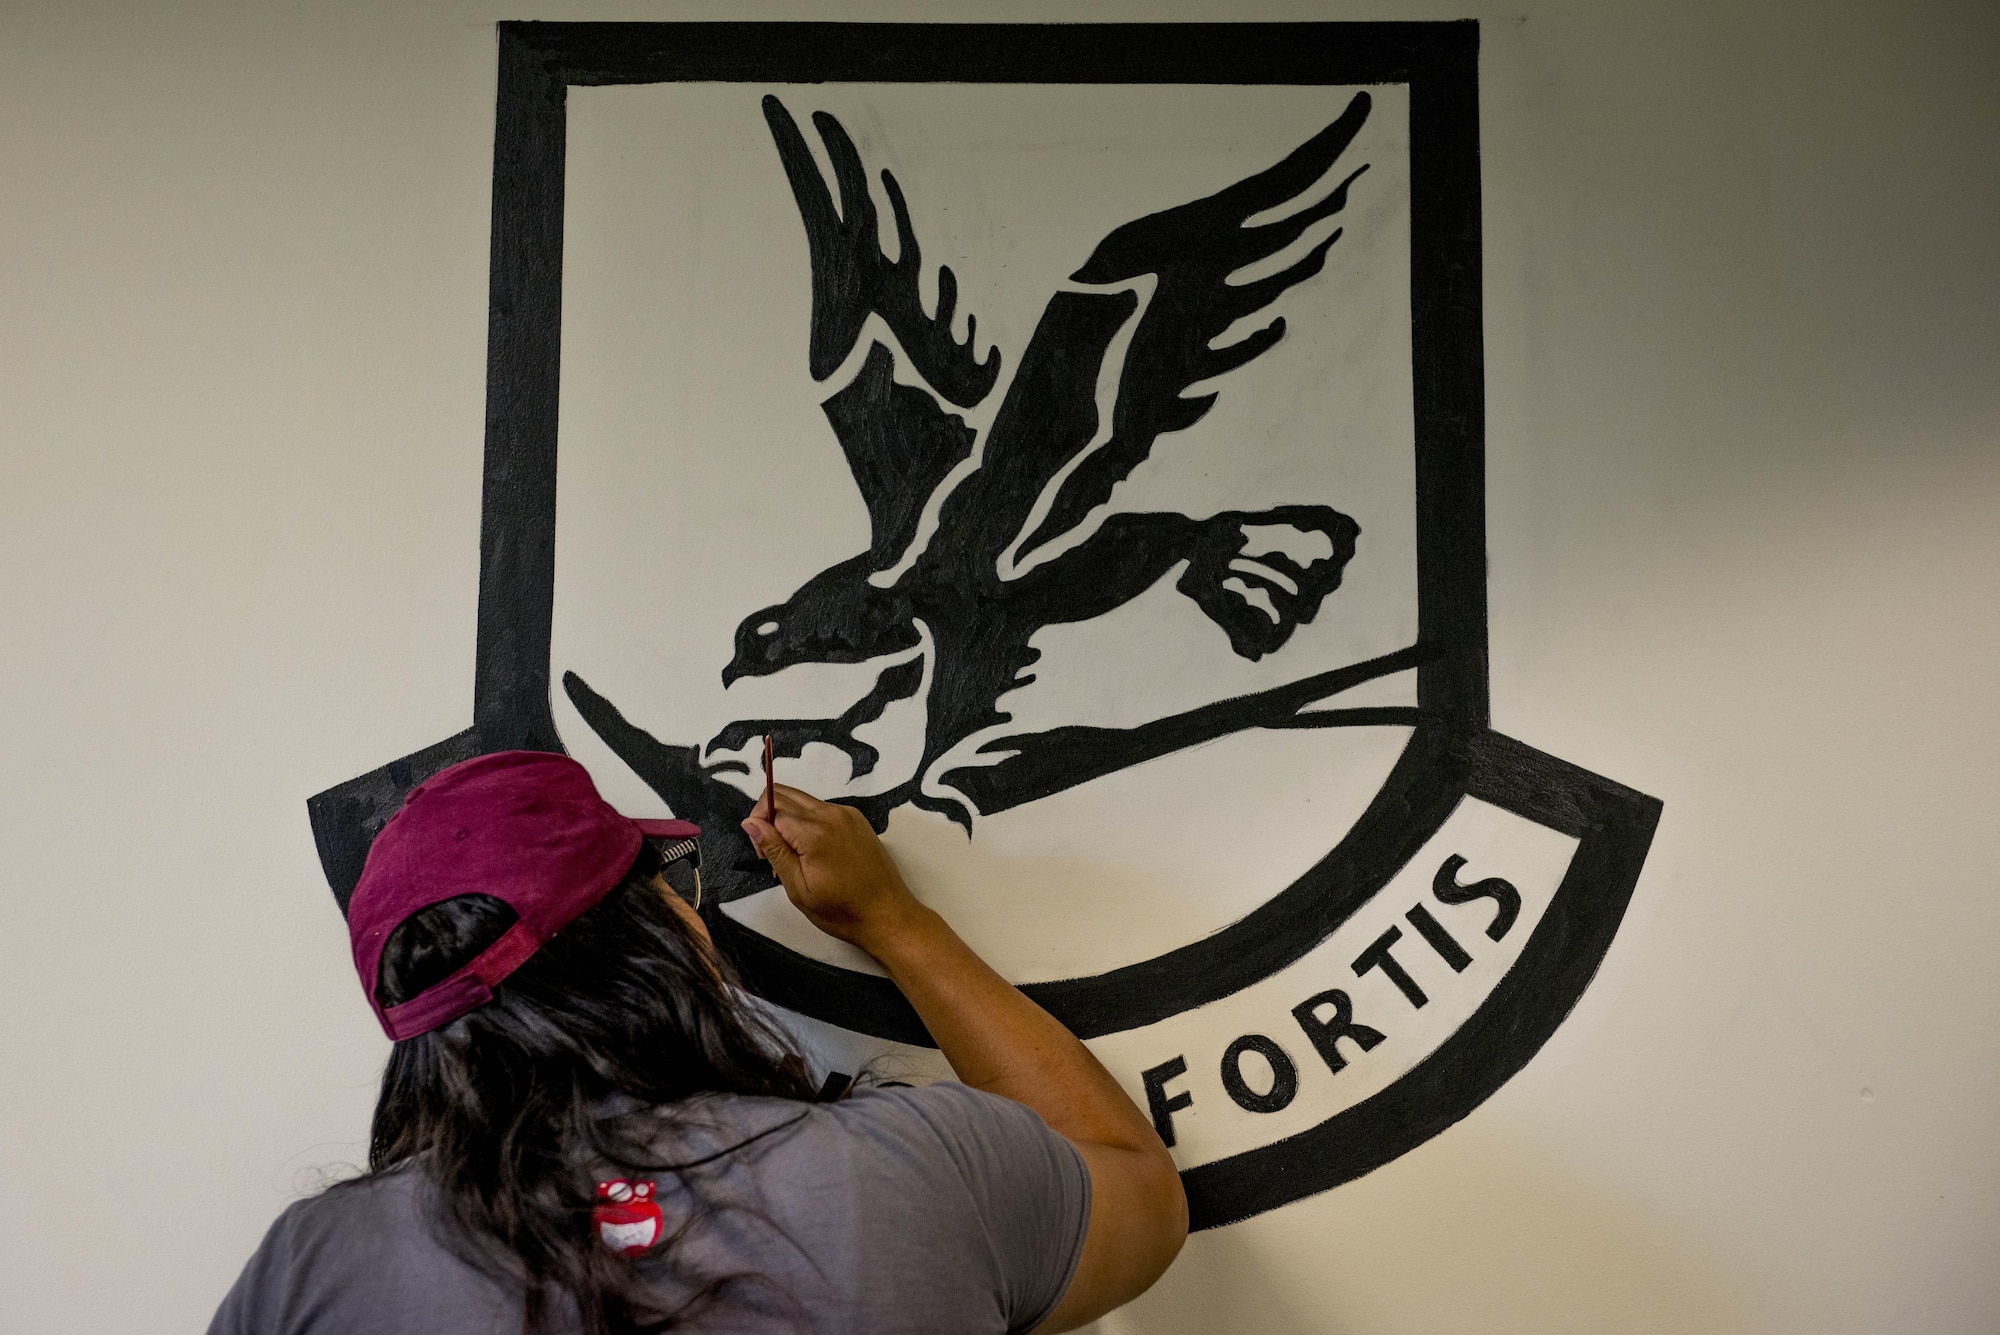 Stockett’s images include the swooping eagle of the Air Force security force’s logo and an American flag with a blue stripe representing police officers.